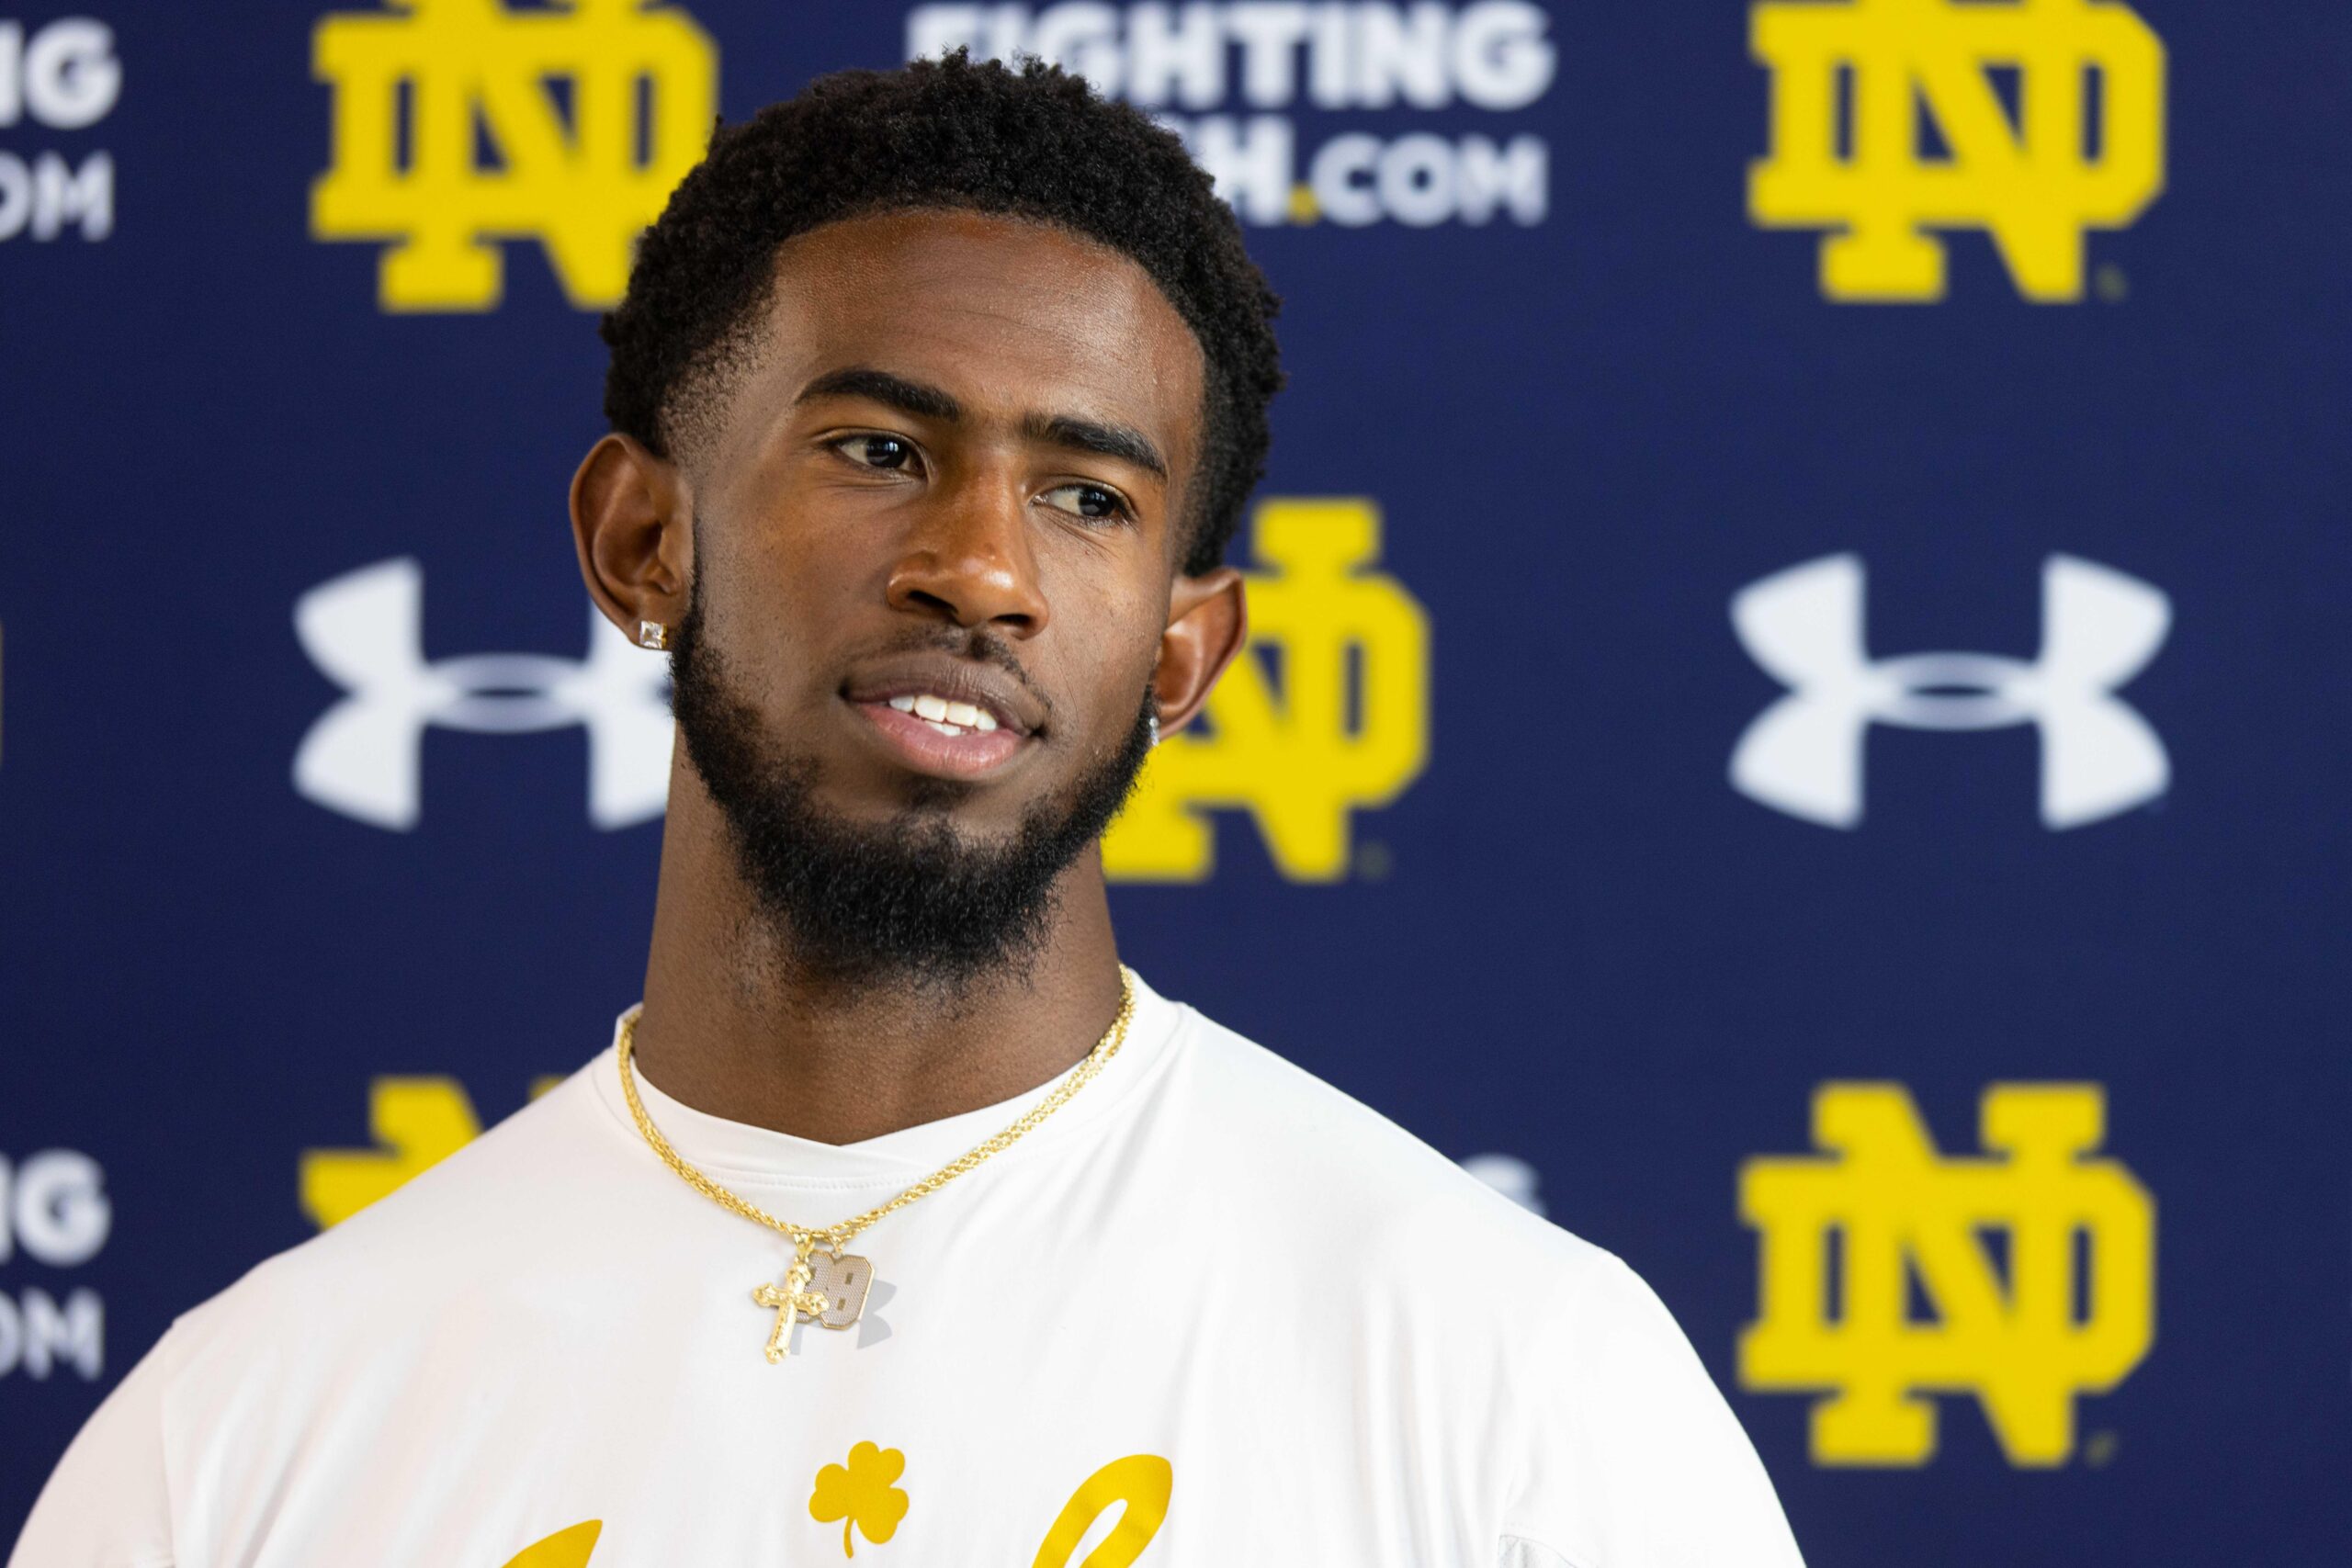 Wide receiver Beaux Collins is looking to make his final season of eligibility an impactful one for the Notre Dame Fighting Irish.